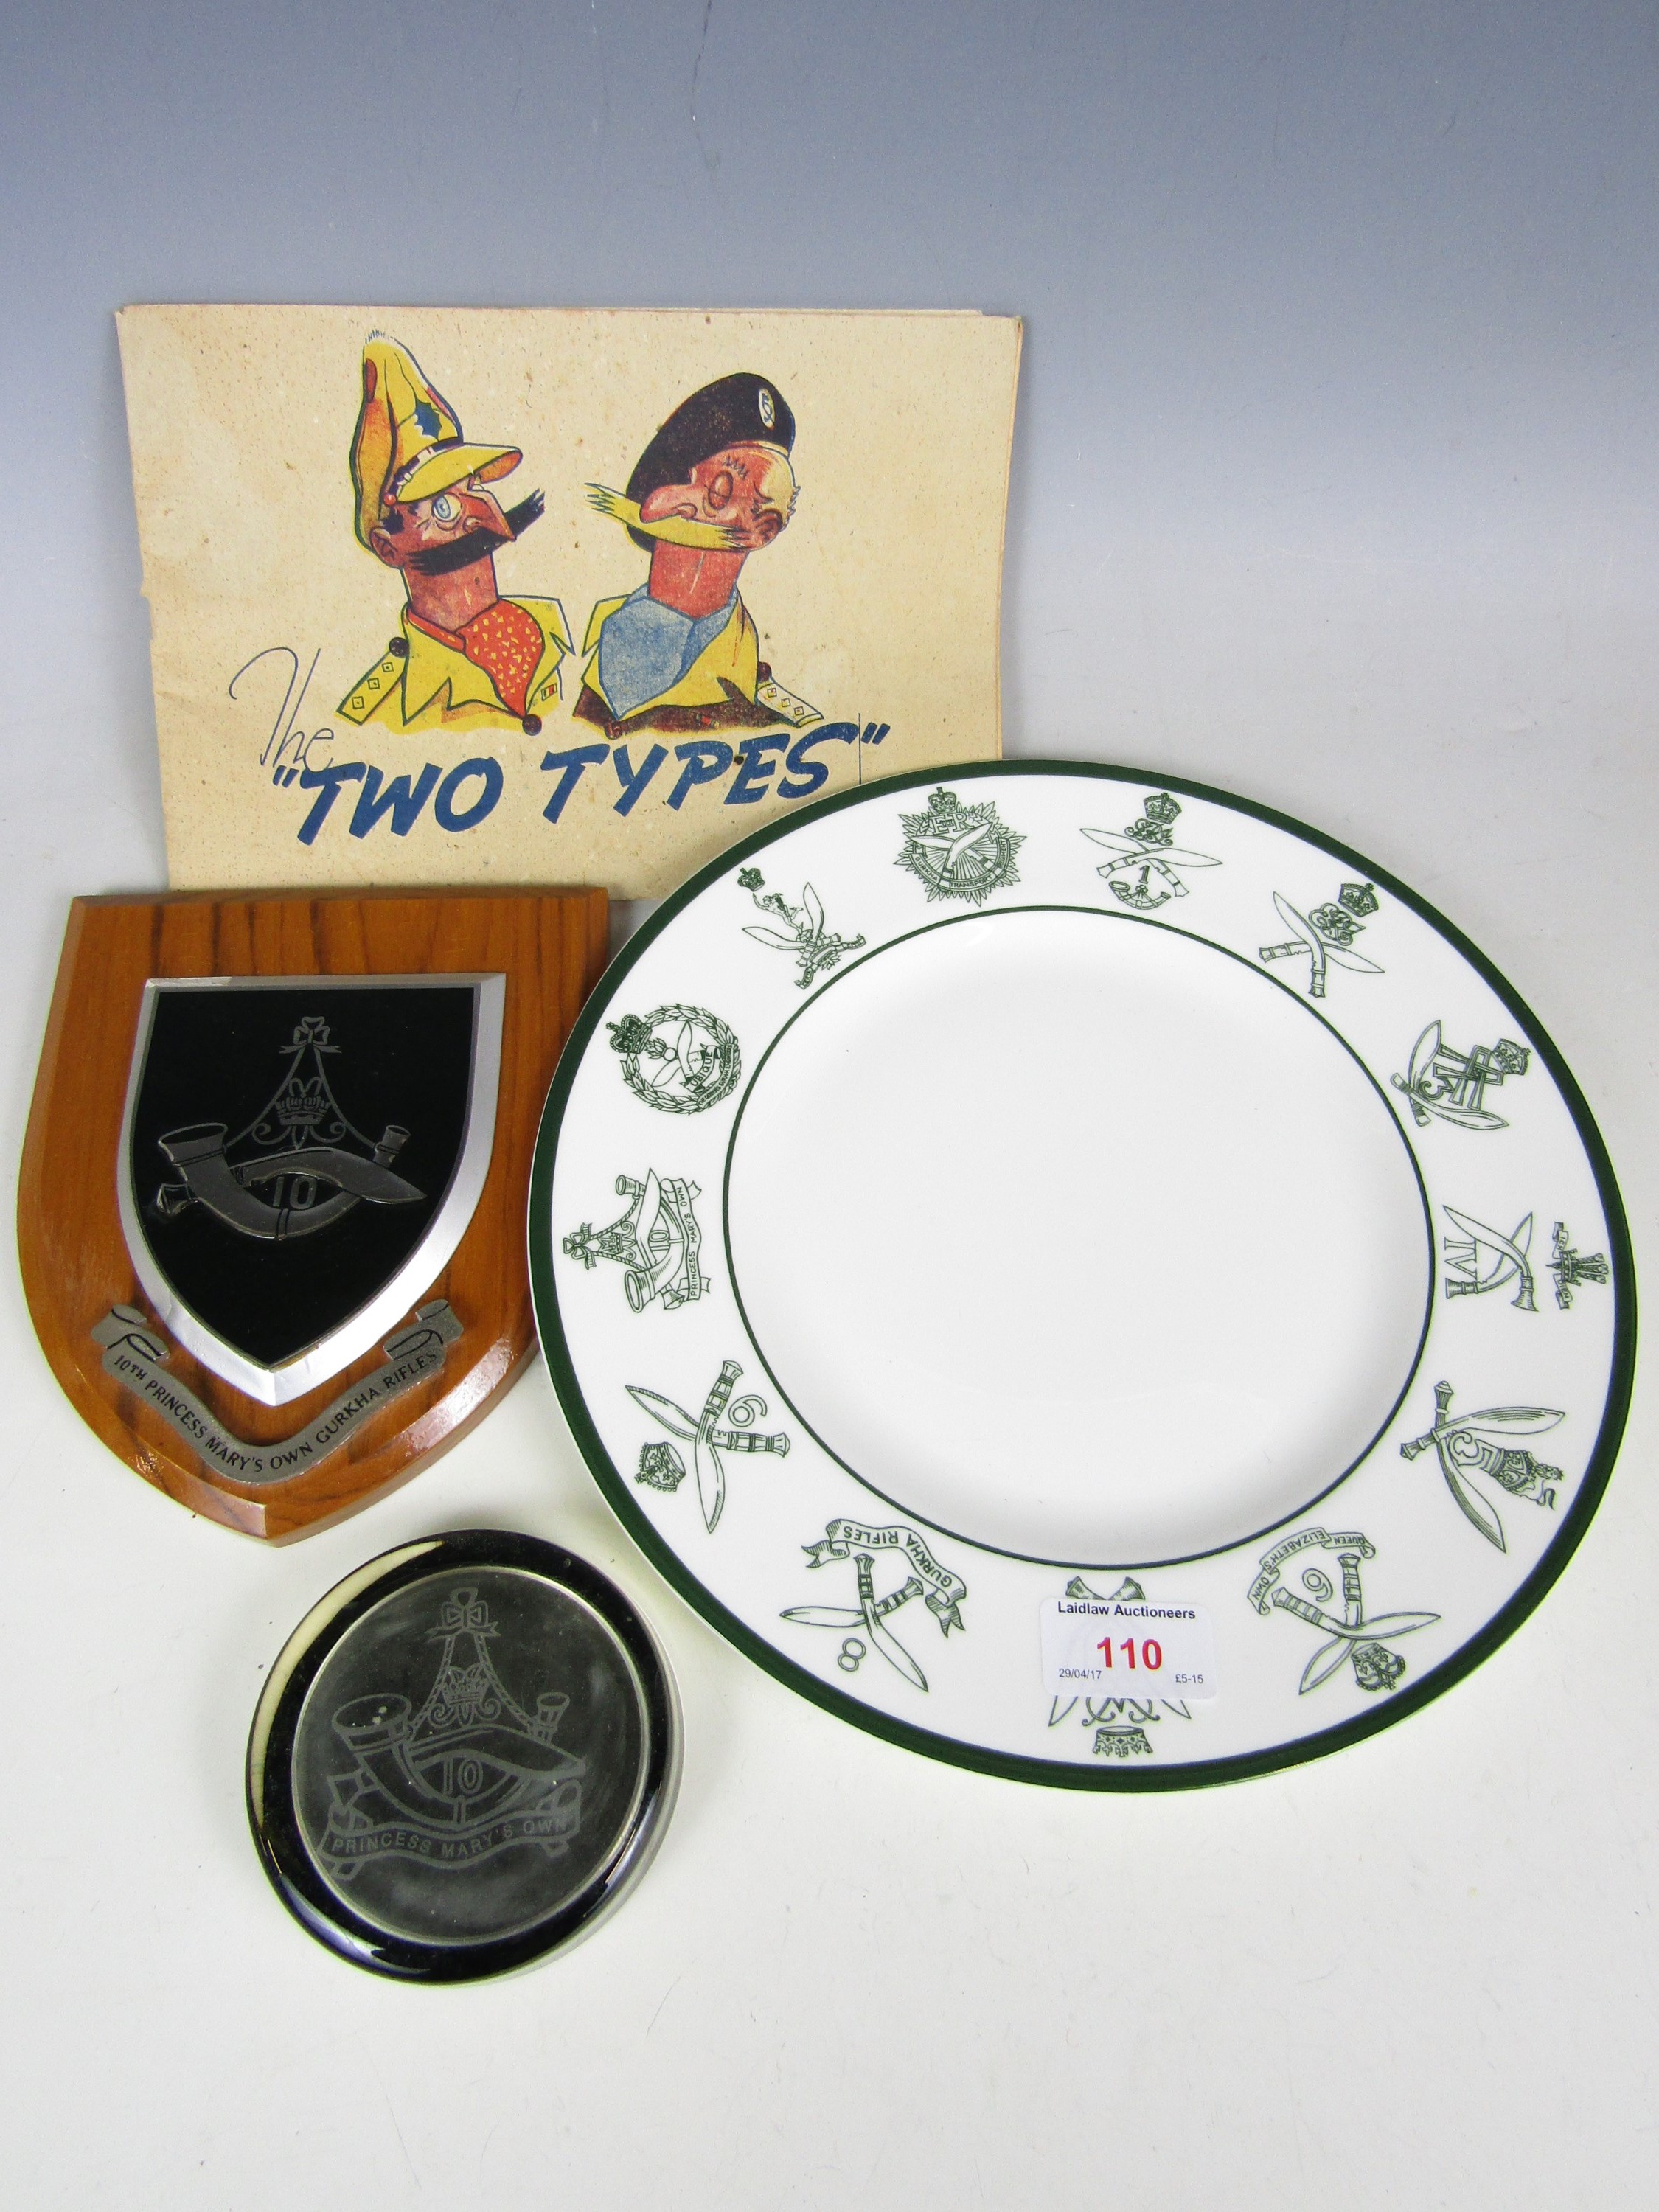 A Coalport Ghurka plate together with a plaque, a paperweight and a cartoon book The Two Types by